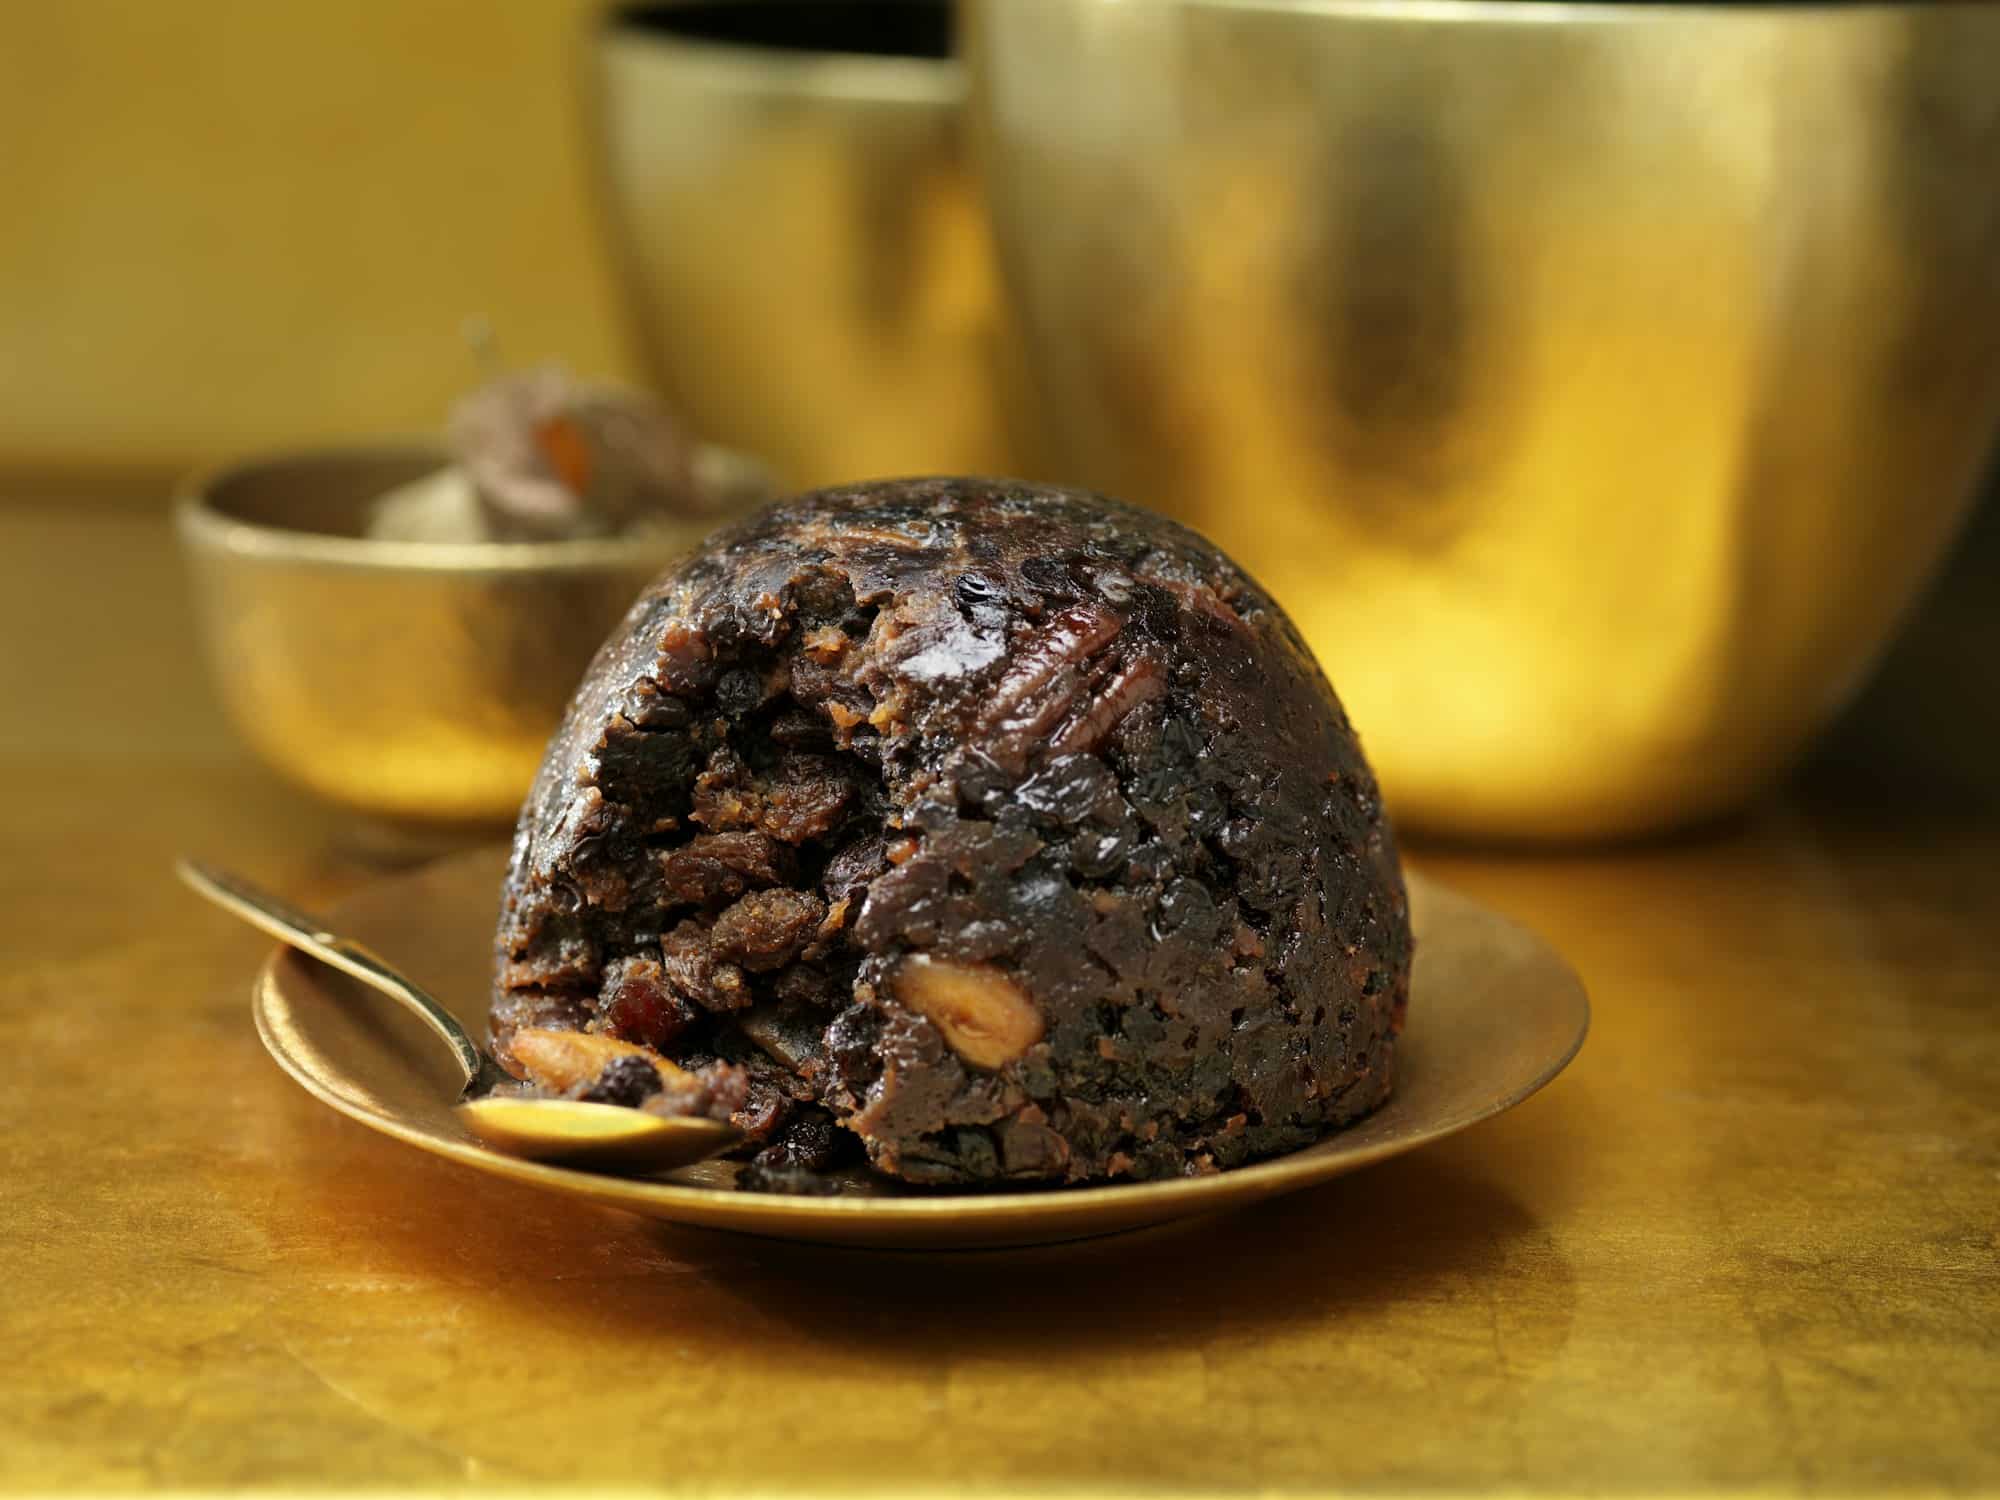 A serving of Steamed Fruit Pudding without the vanilla sauce.